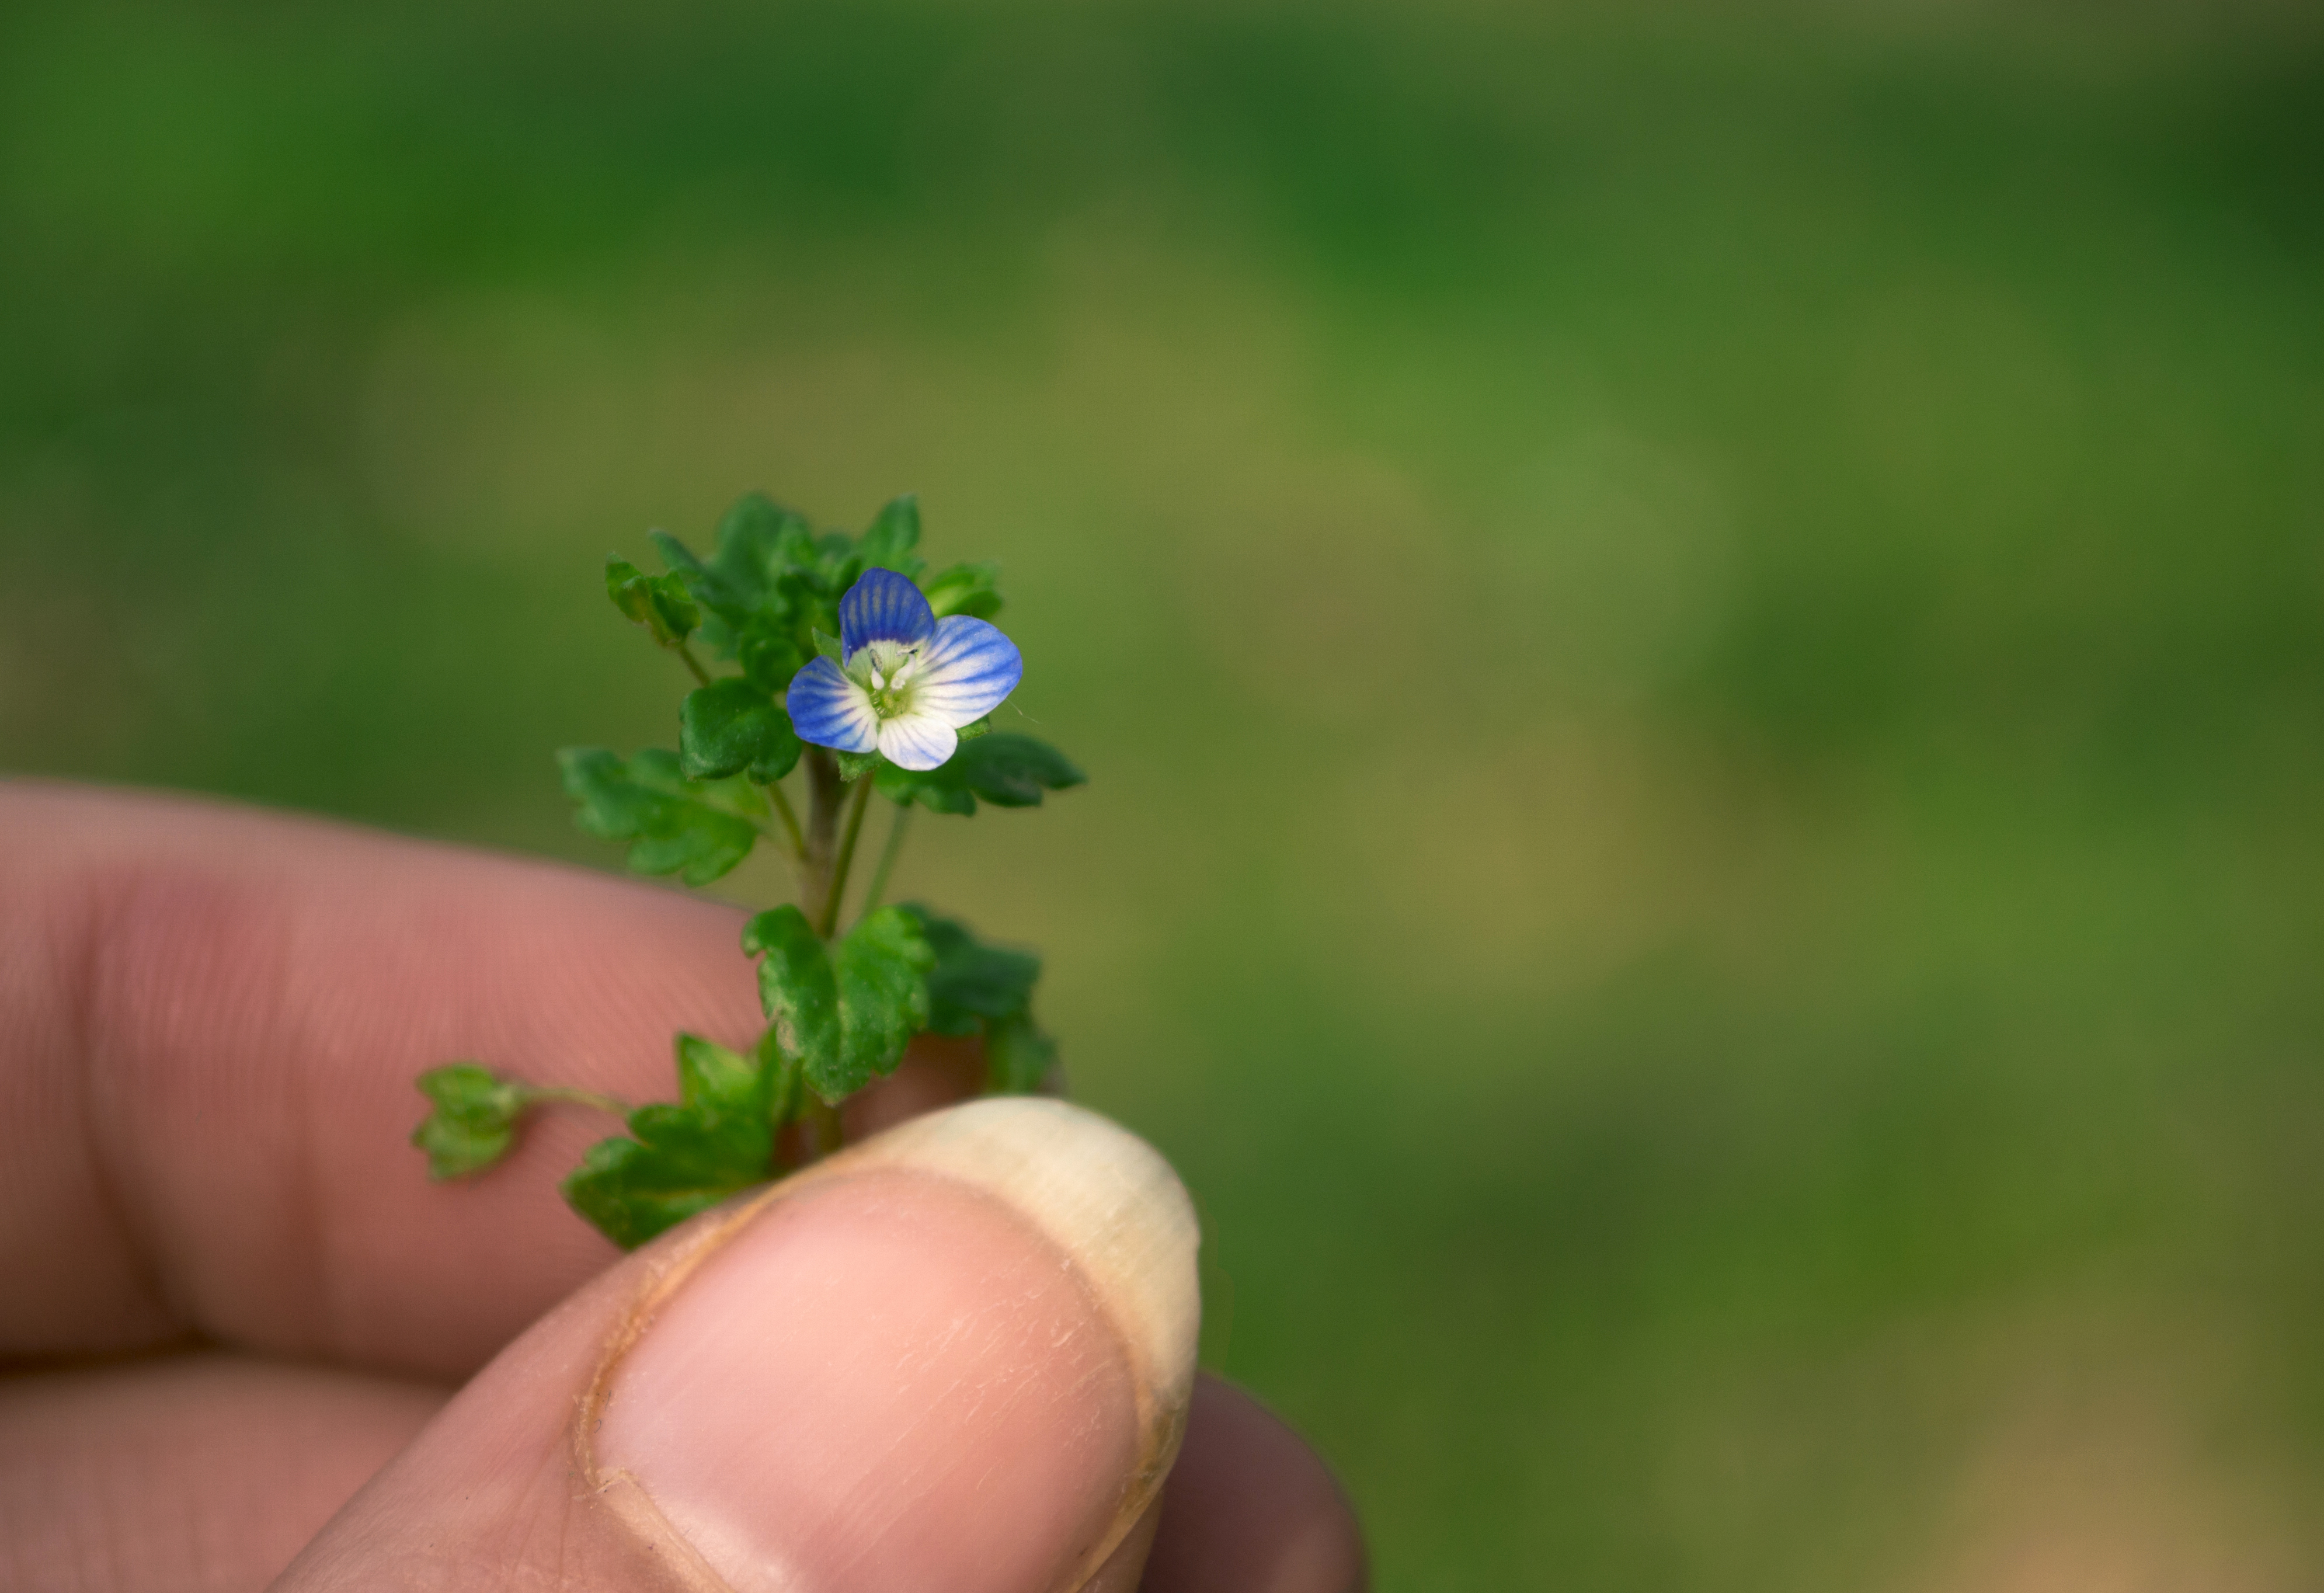 Tiny Blue Flower 1 by Hollys-Critters on DeviantArt